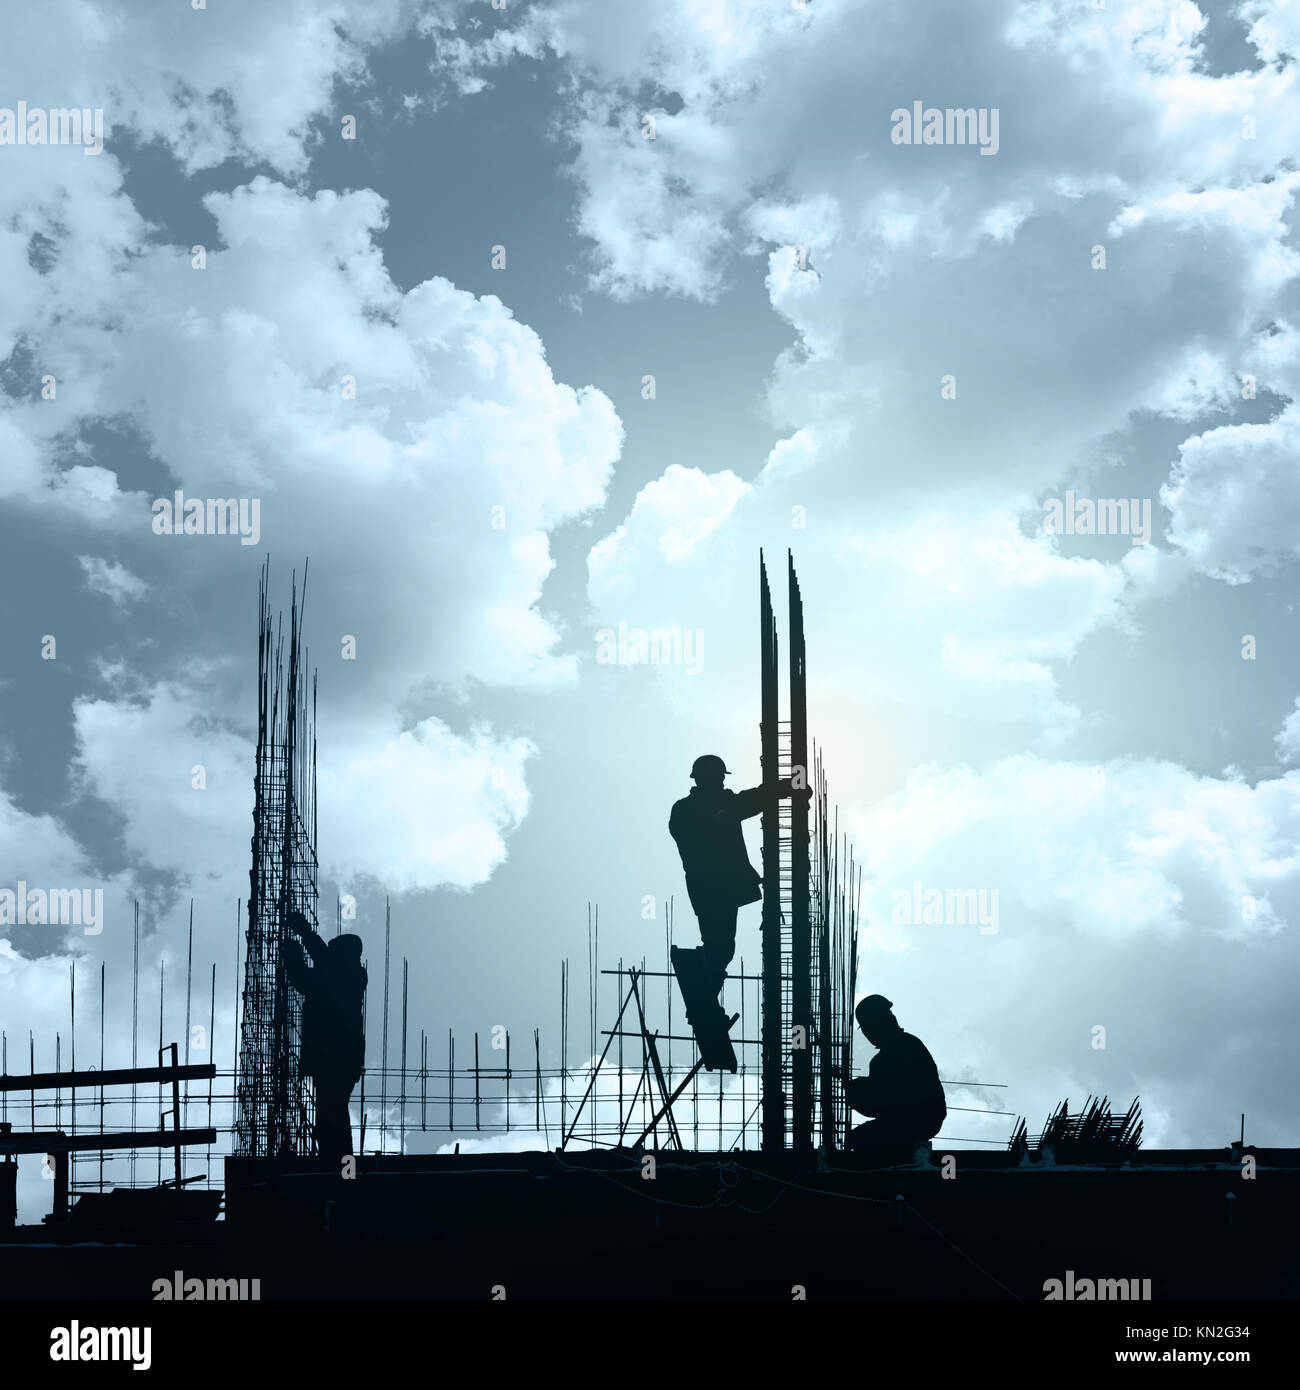 Unrecognizable silhouettes of builders against the background of a colorful sunset Stock Photo